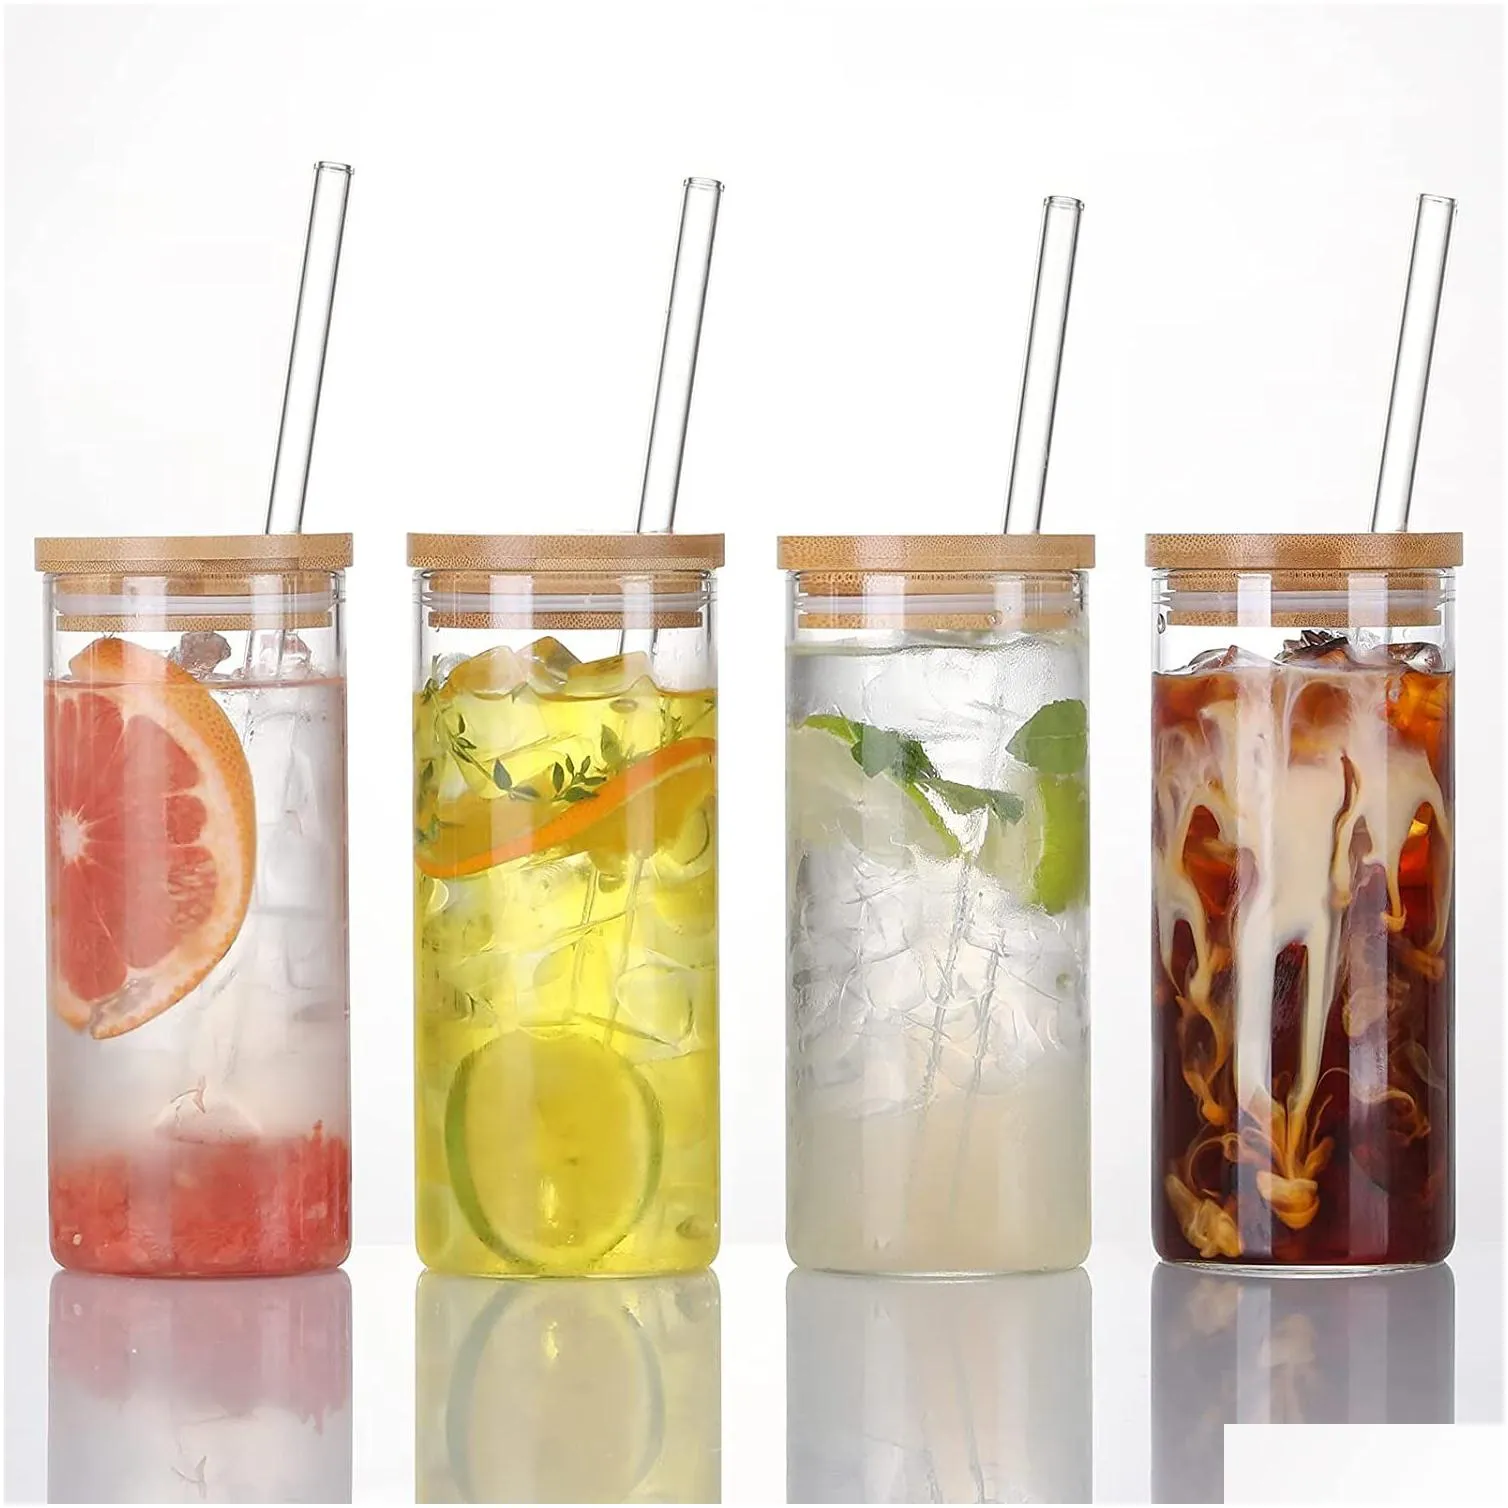 4 Set 20 OZ Drinking Glasses with Bamboo Lids and Straws Borosilicate Glass